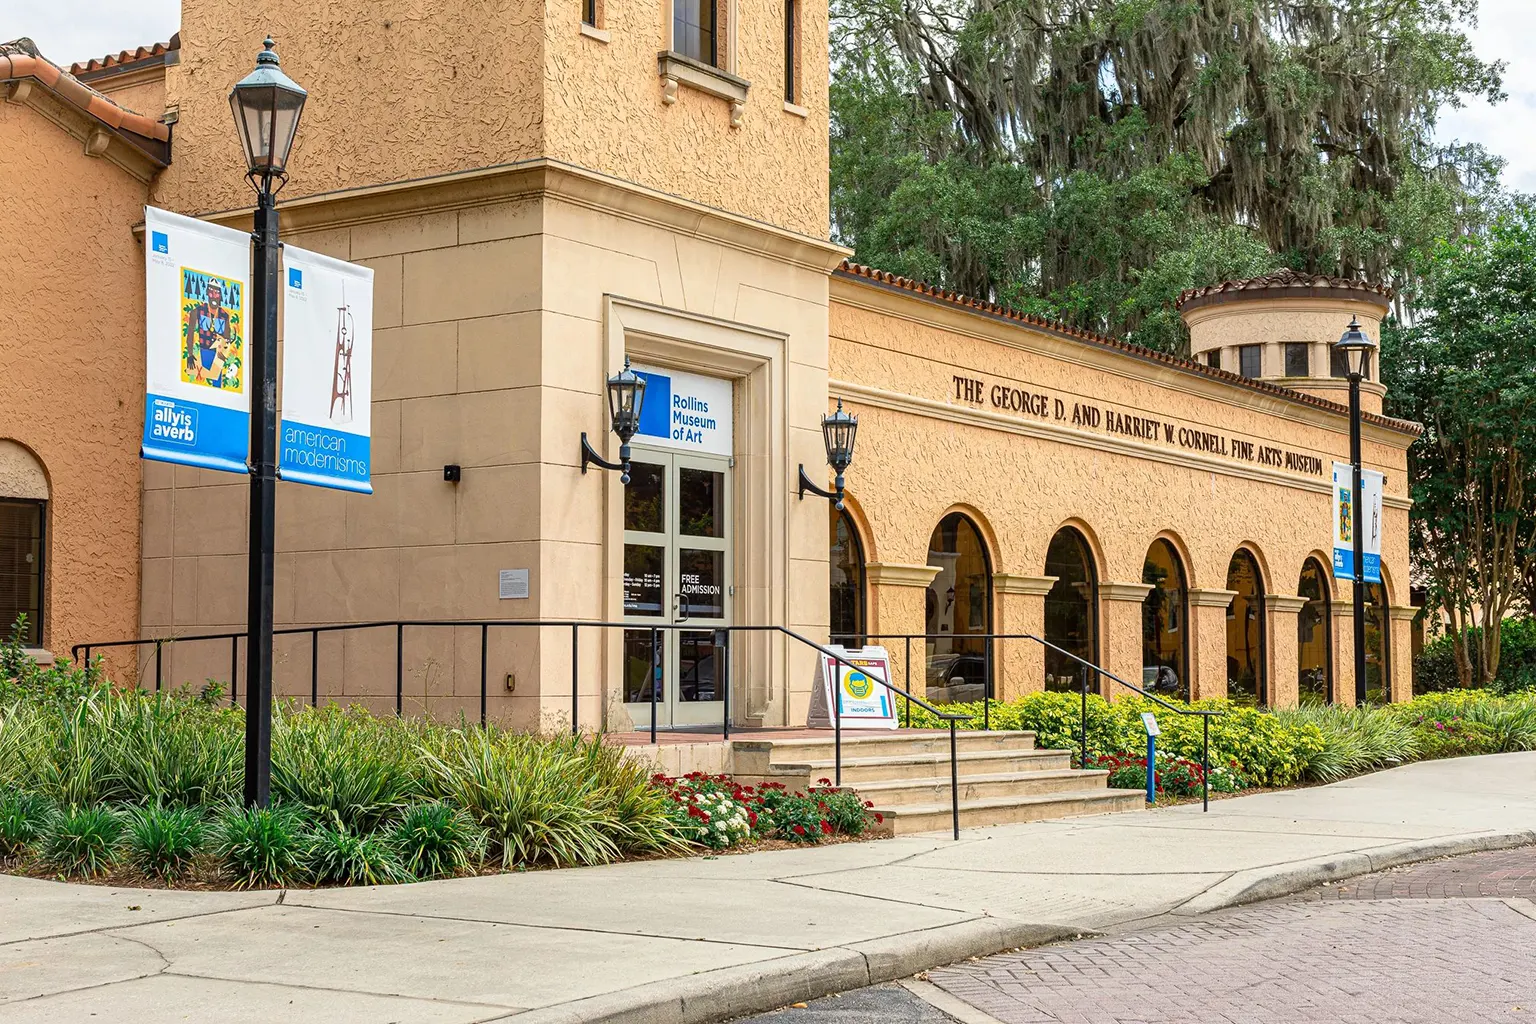 9. Explore Art and Culture at Rollins Museum of Art on a Budget